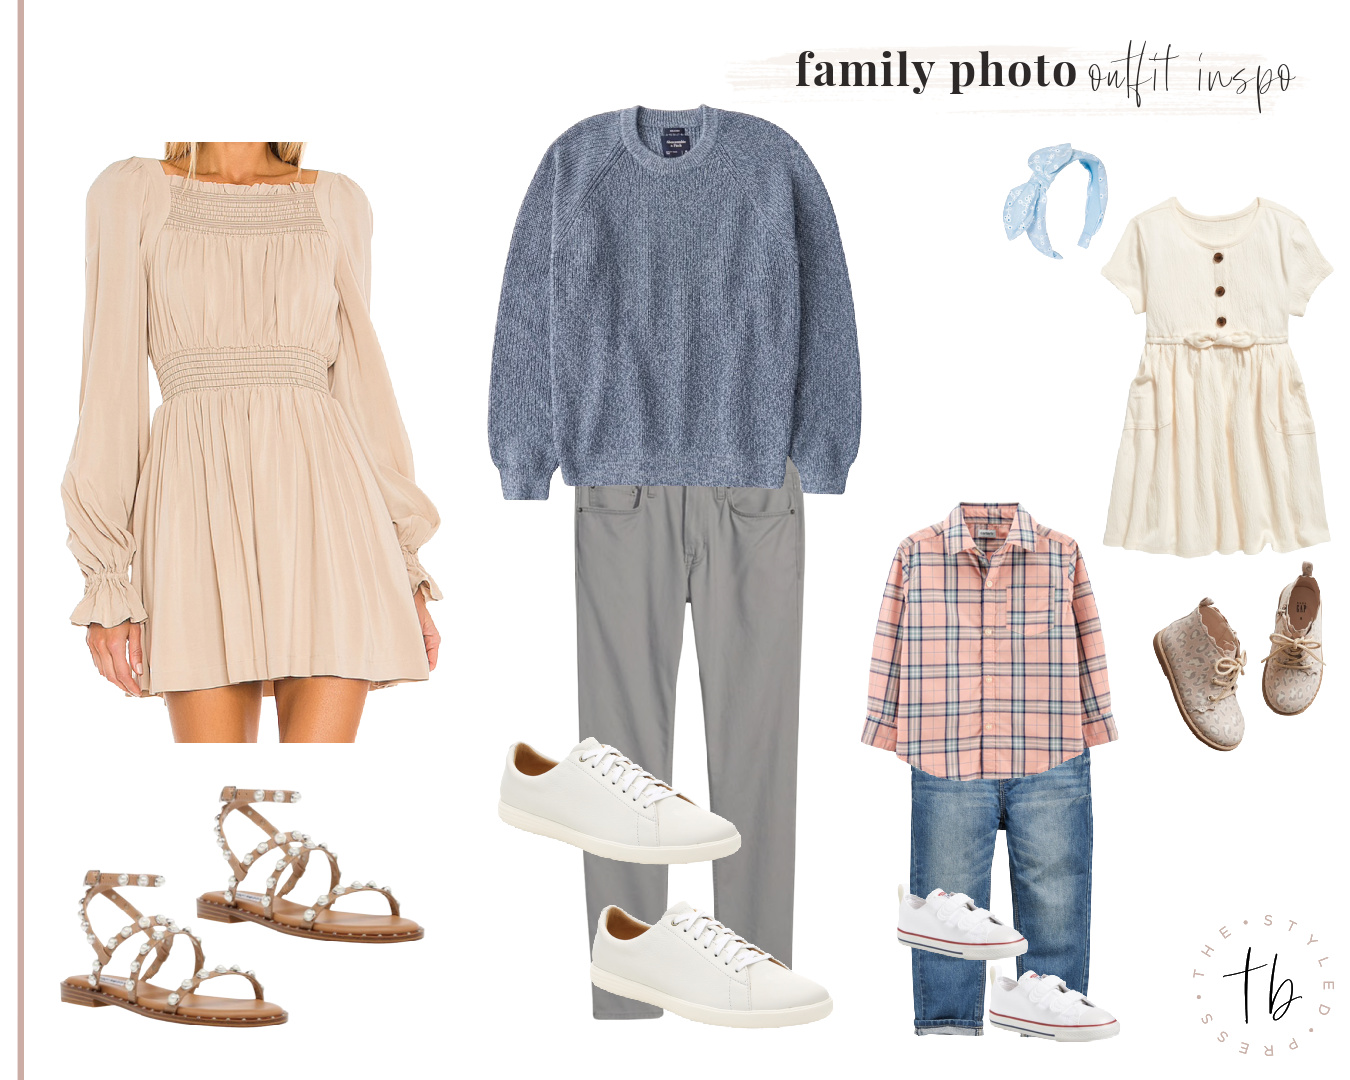 spring family photo outfit ideas, spring outfits 2021, family photo outfit inspo, family photos outfit inspiration